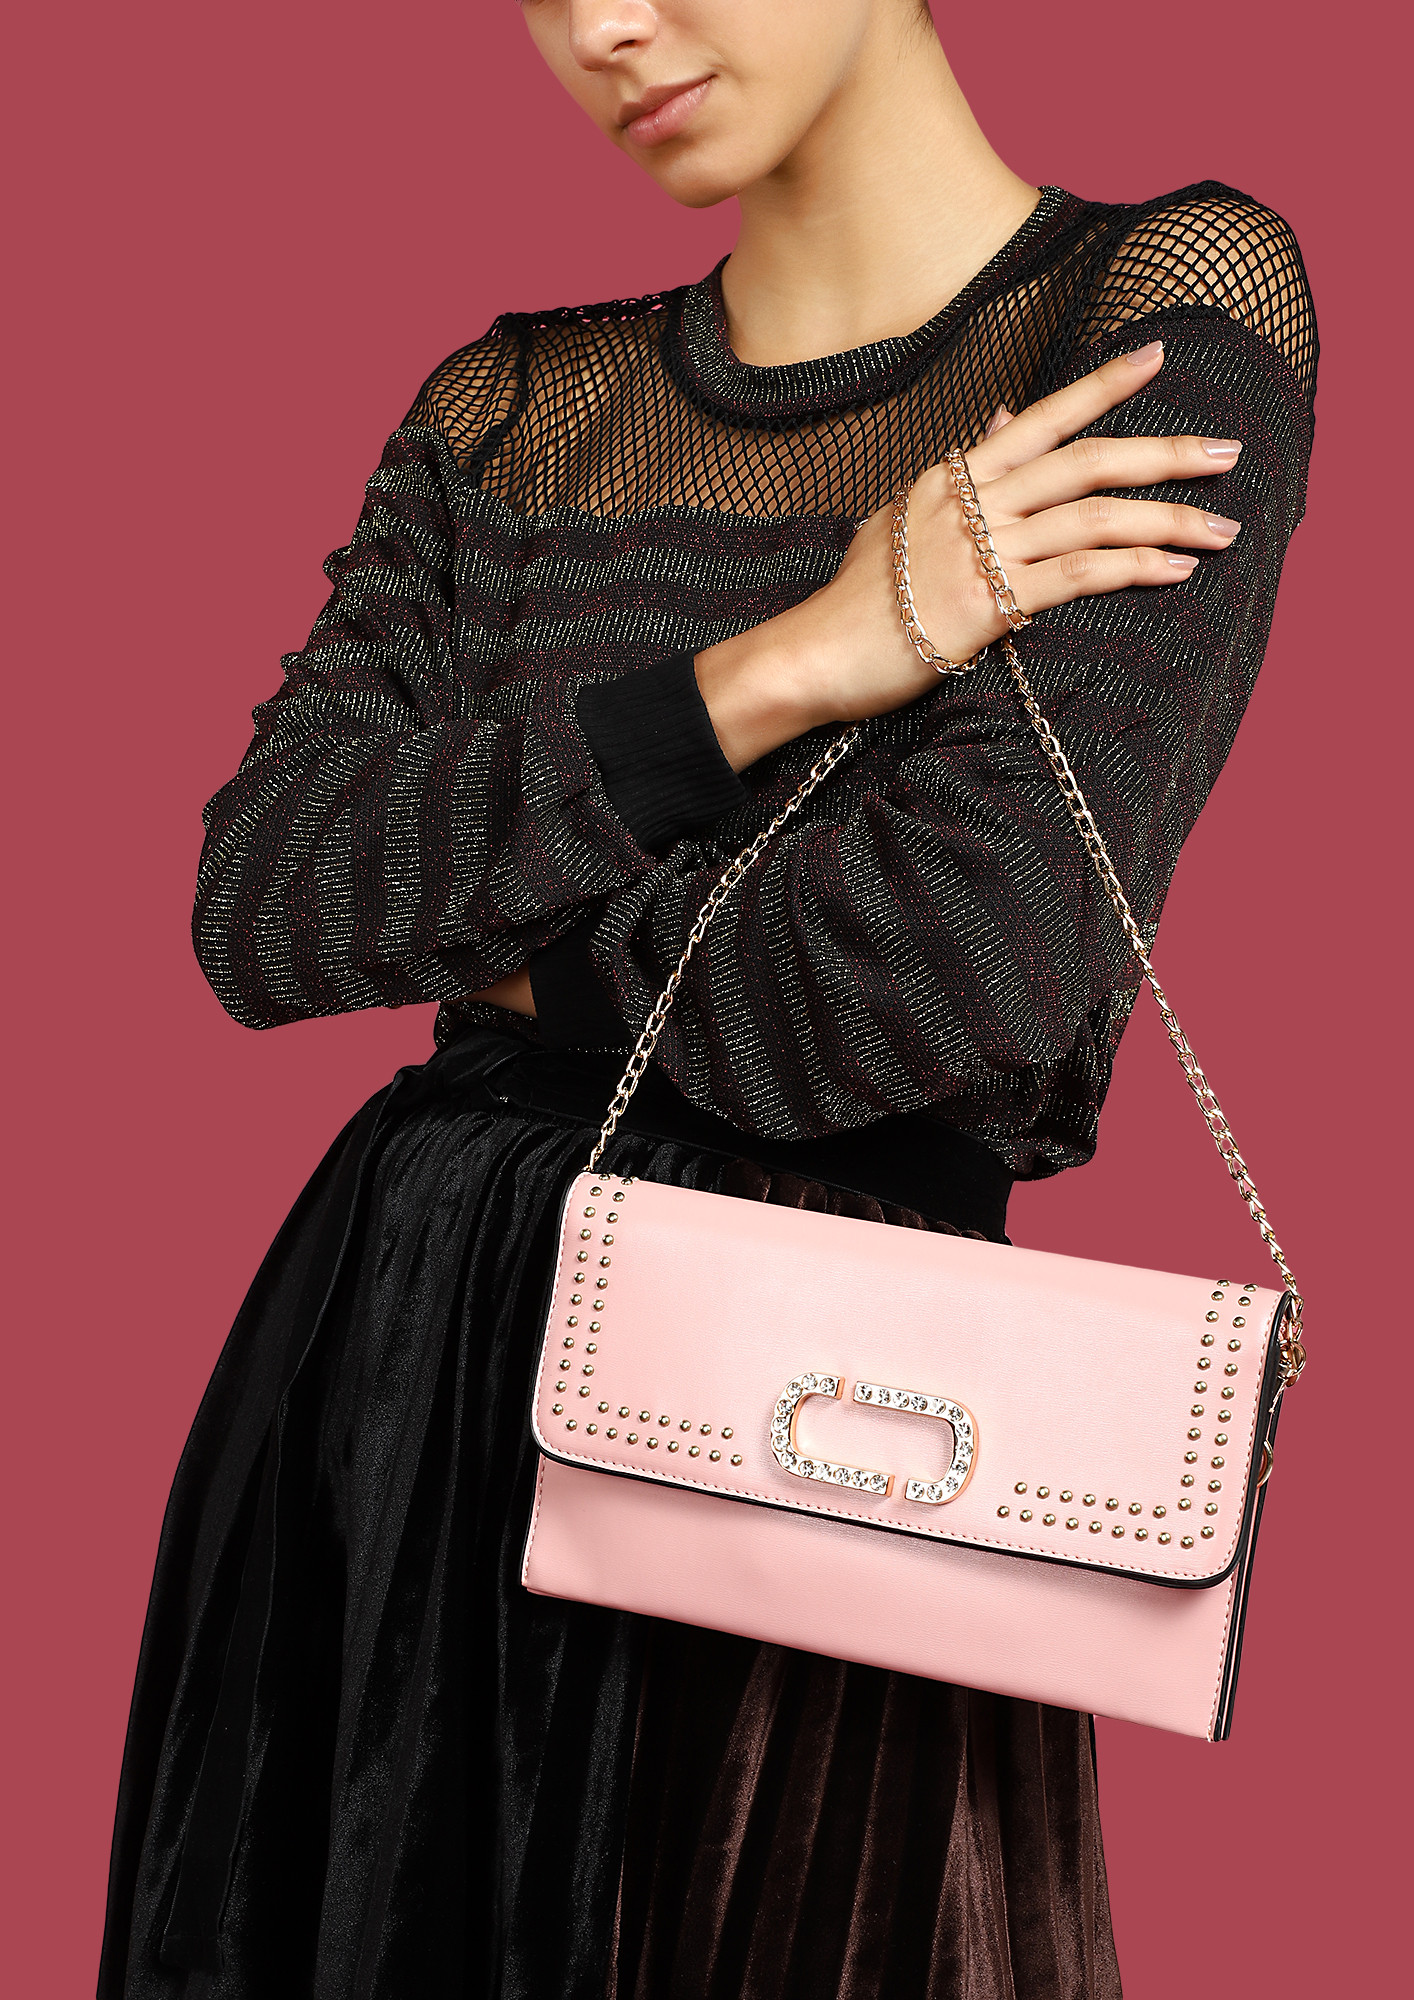 EVER GLAMOROUS PINK CLUTCH